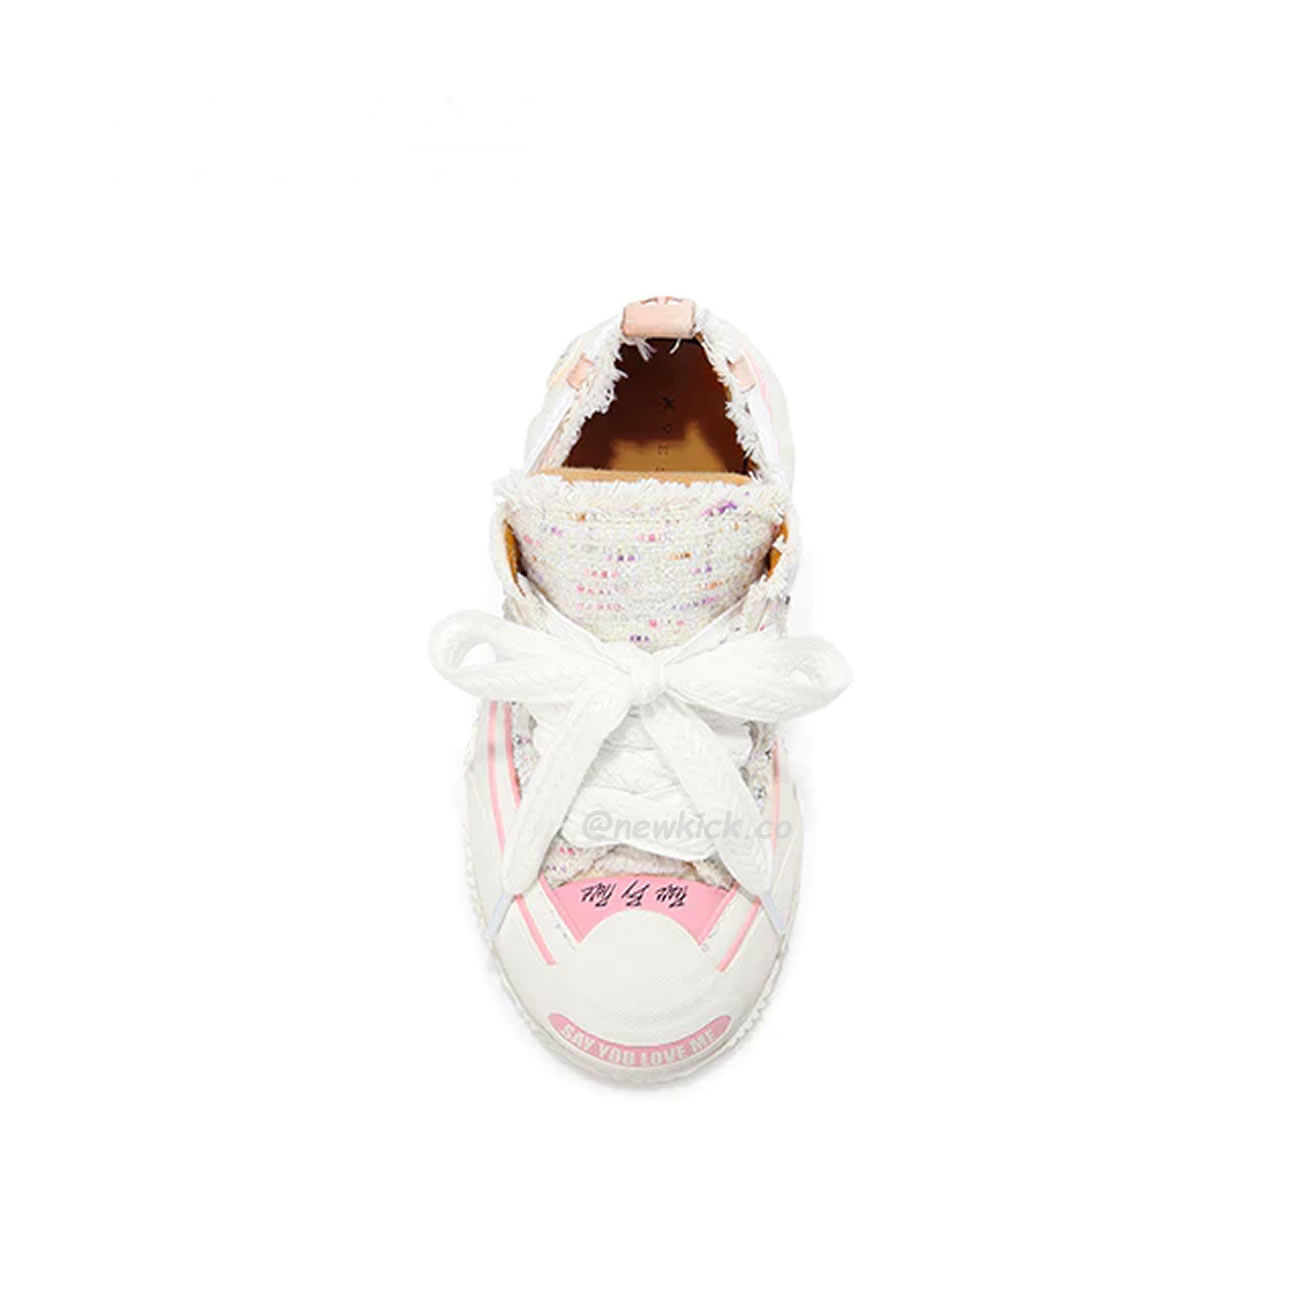 XVESSEL G.O.P. 2.0 MARSHMALLOW LOWS BLACK WHITE PINK